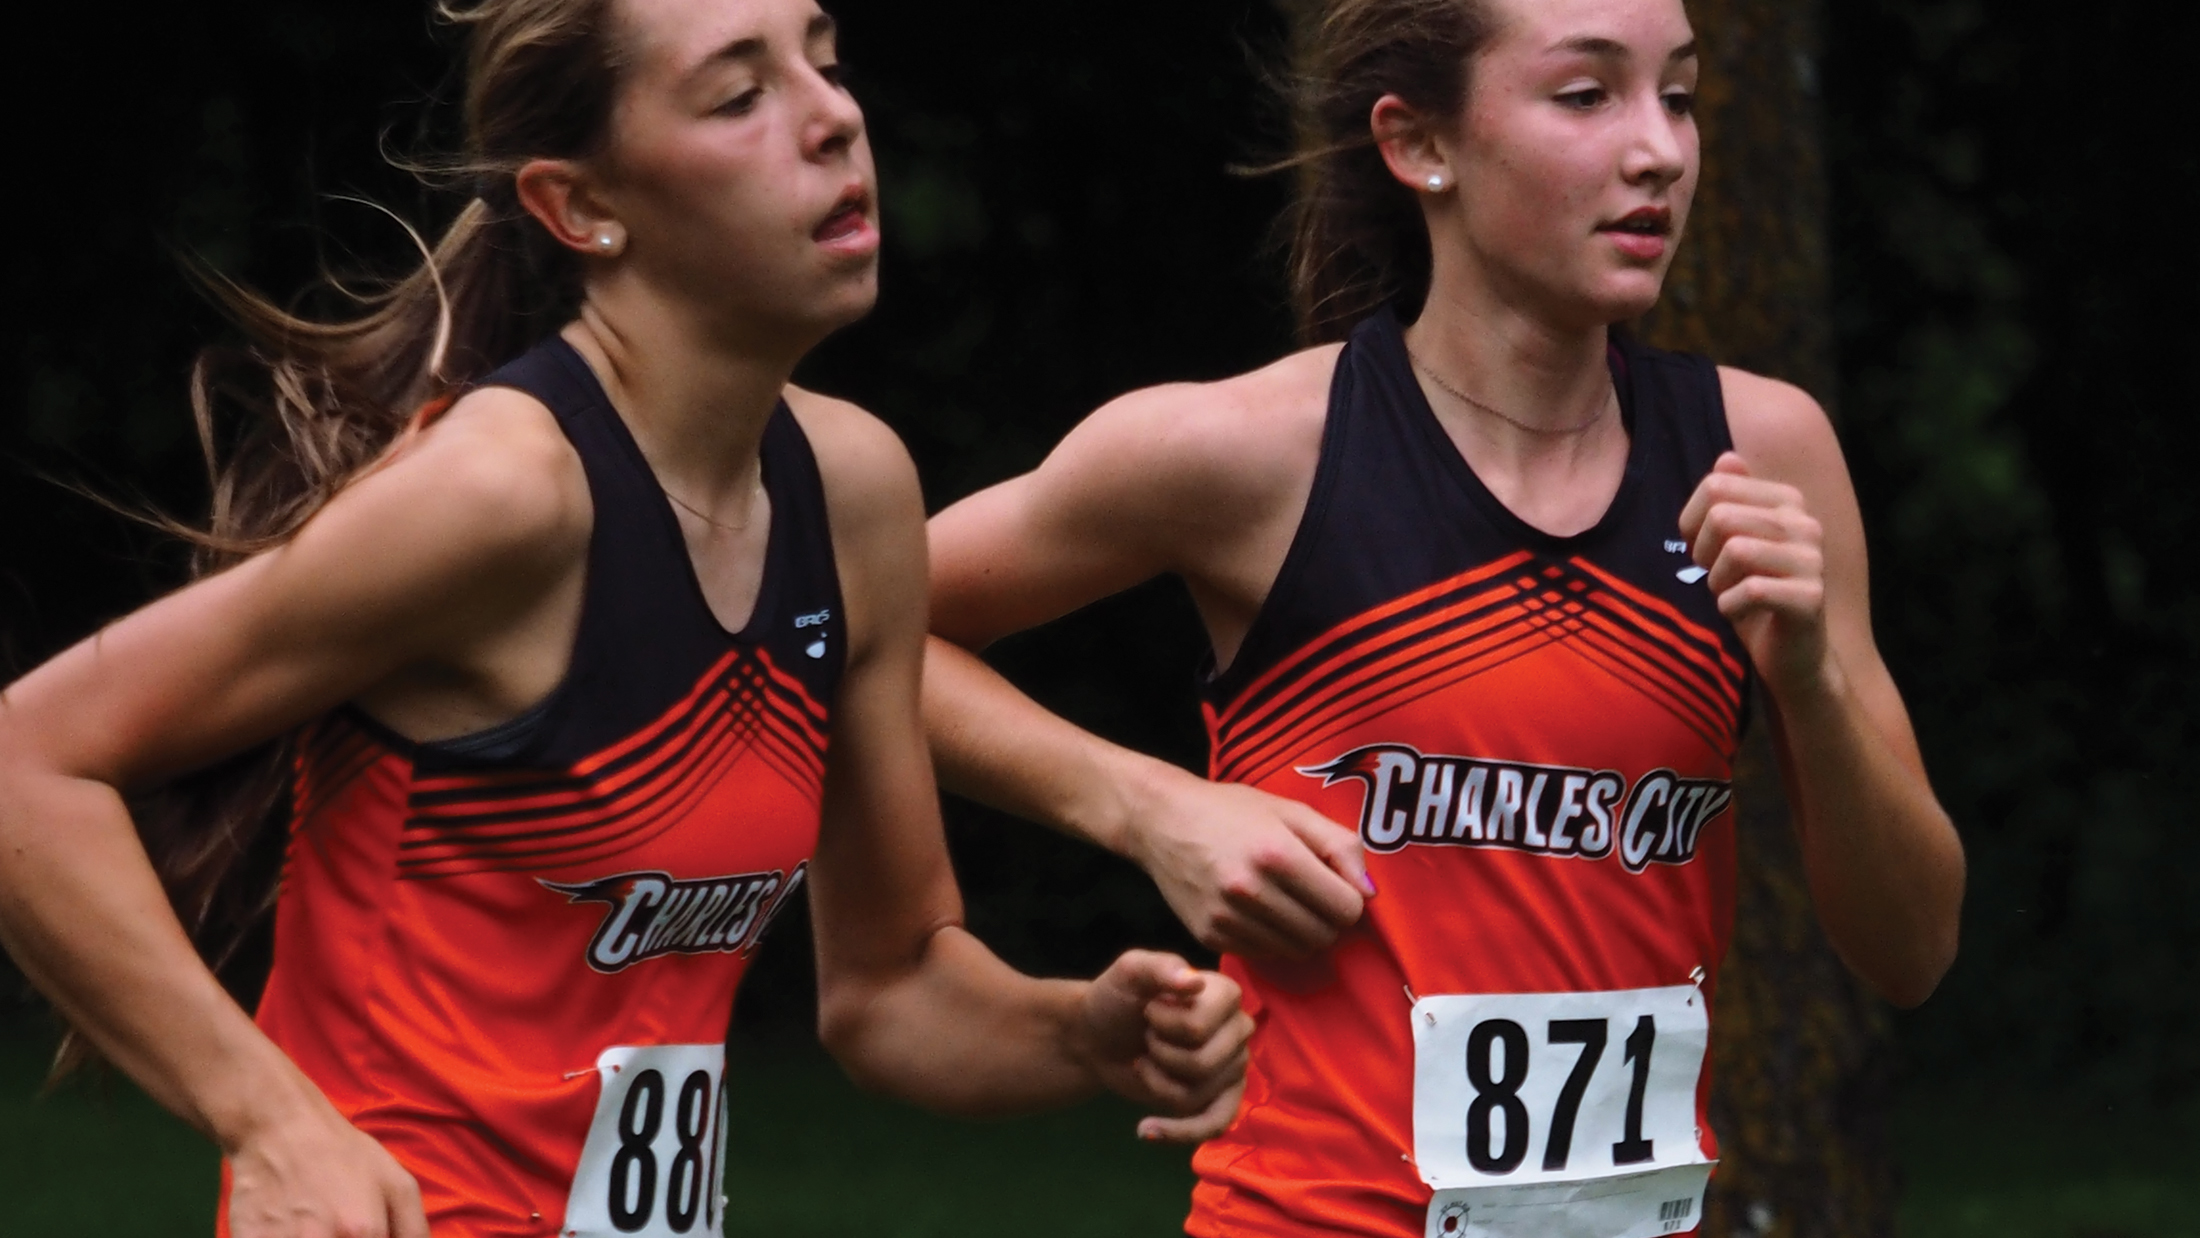 Martin nips Comet teammate Connell at the line to win Early-Bird Invite